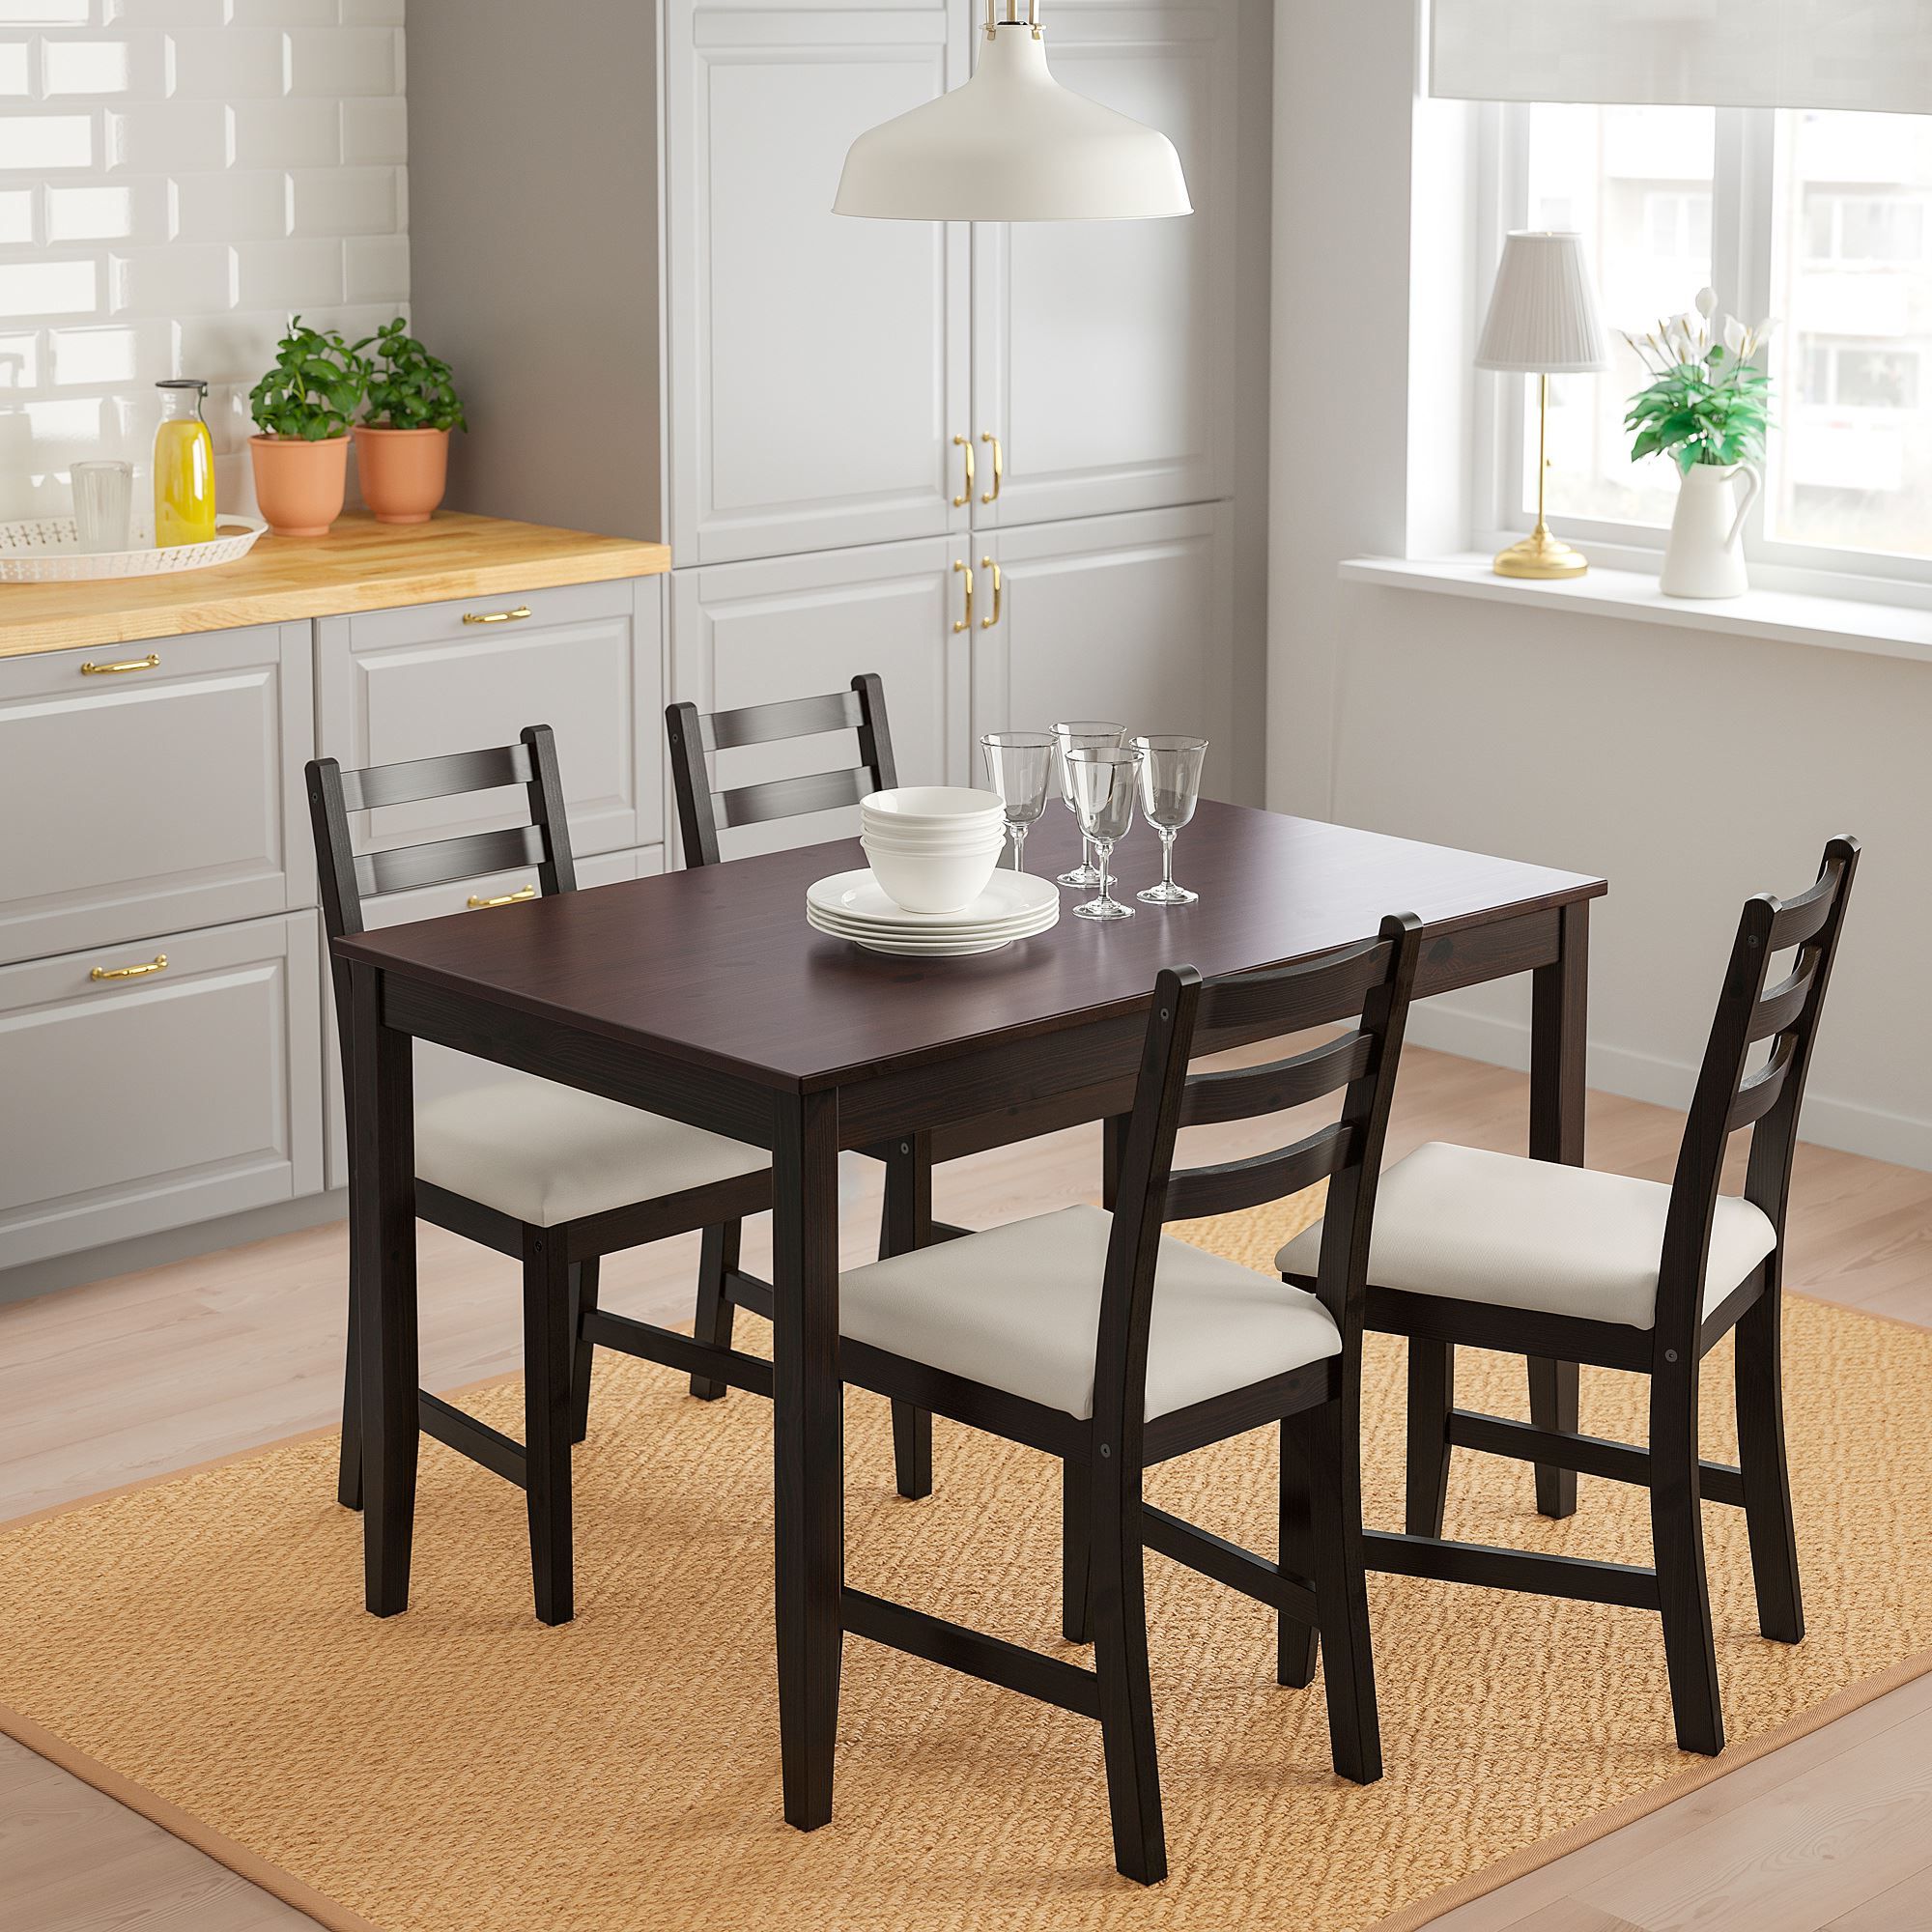 Widely Used Lerhamn, Dining Table And Chairs, Black Brown/vittaryd Beige With Regard To Brown Dining Tables (View 3 of 20)